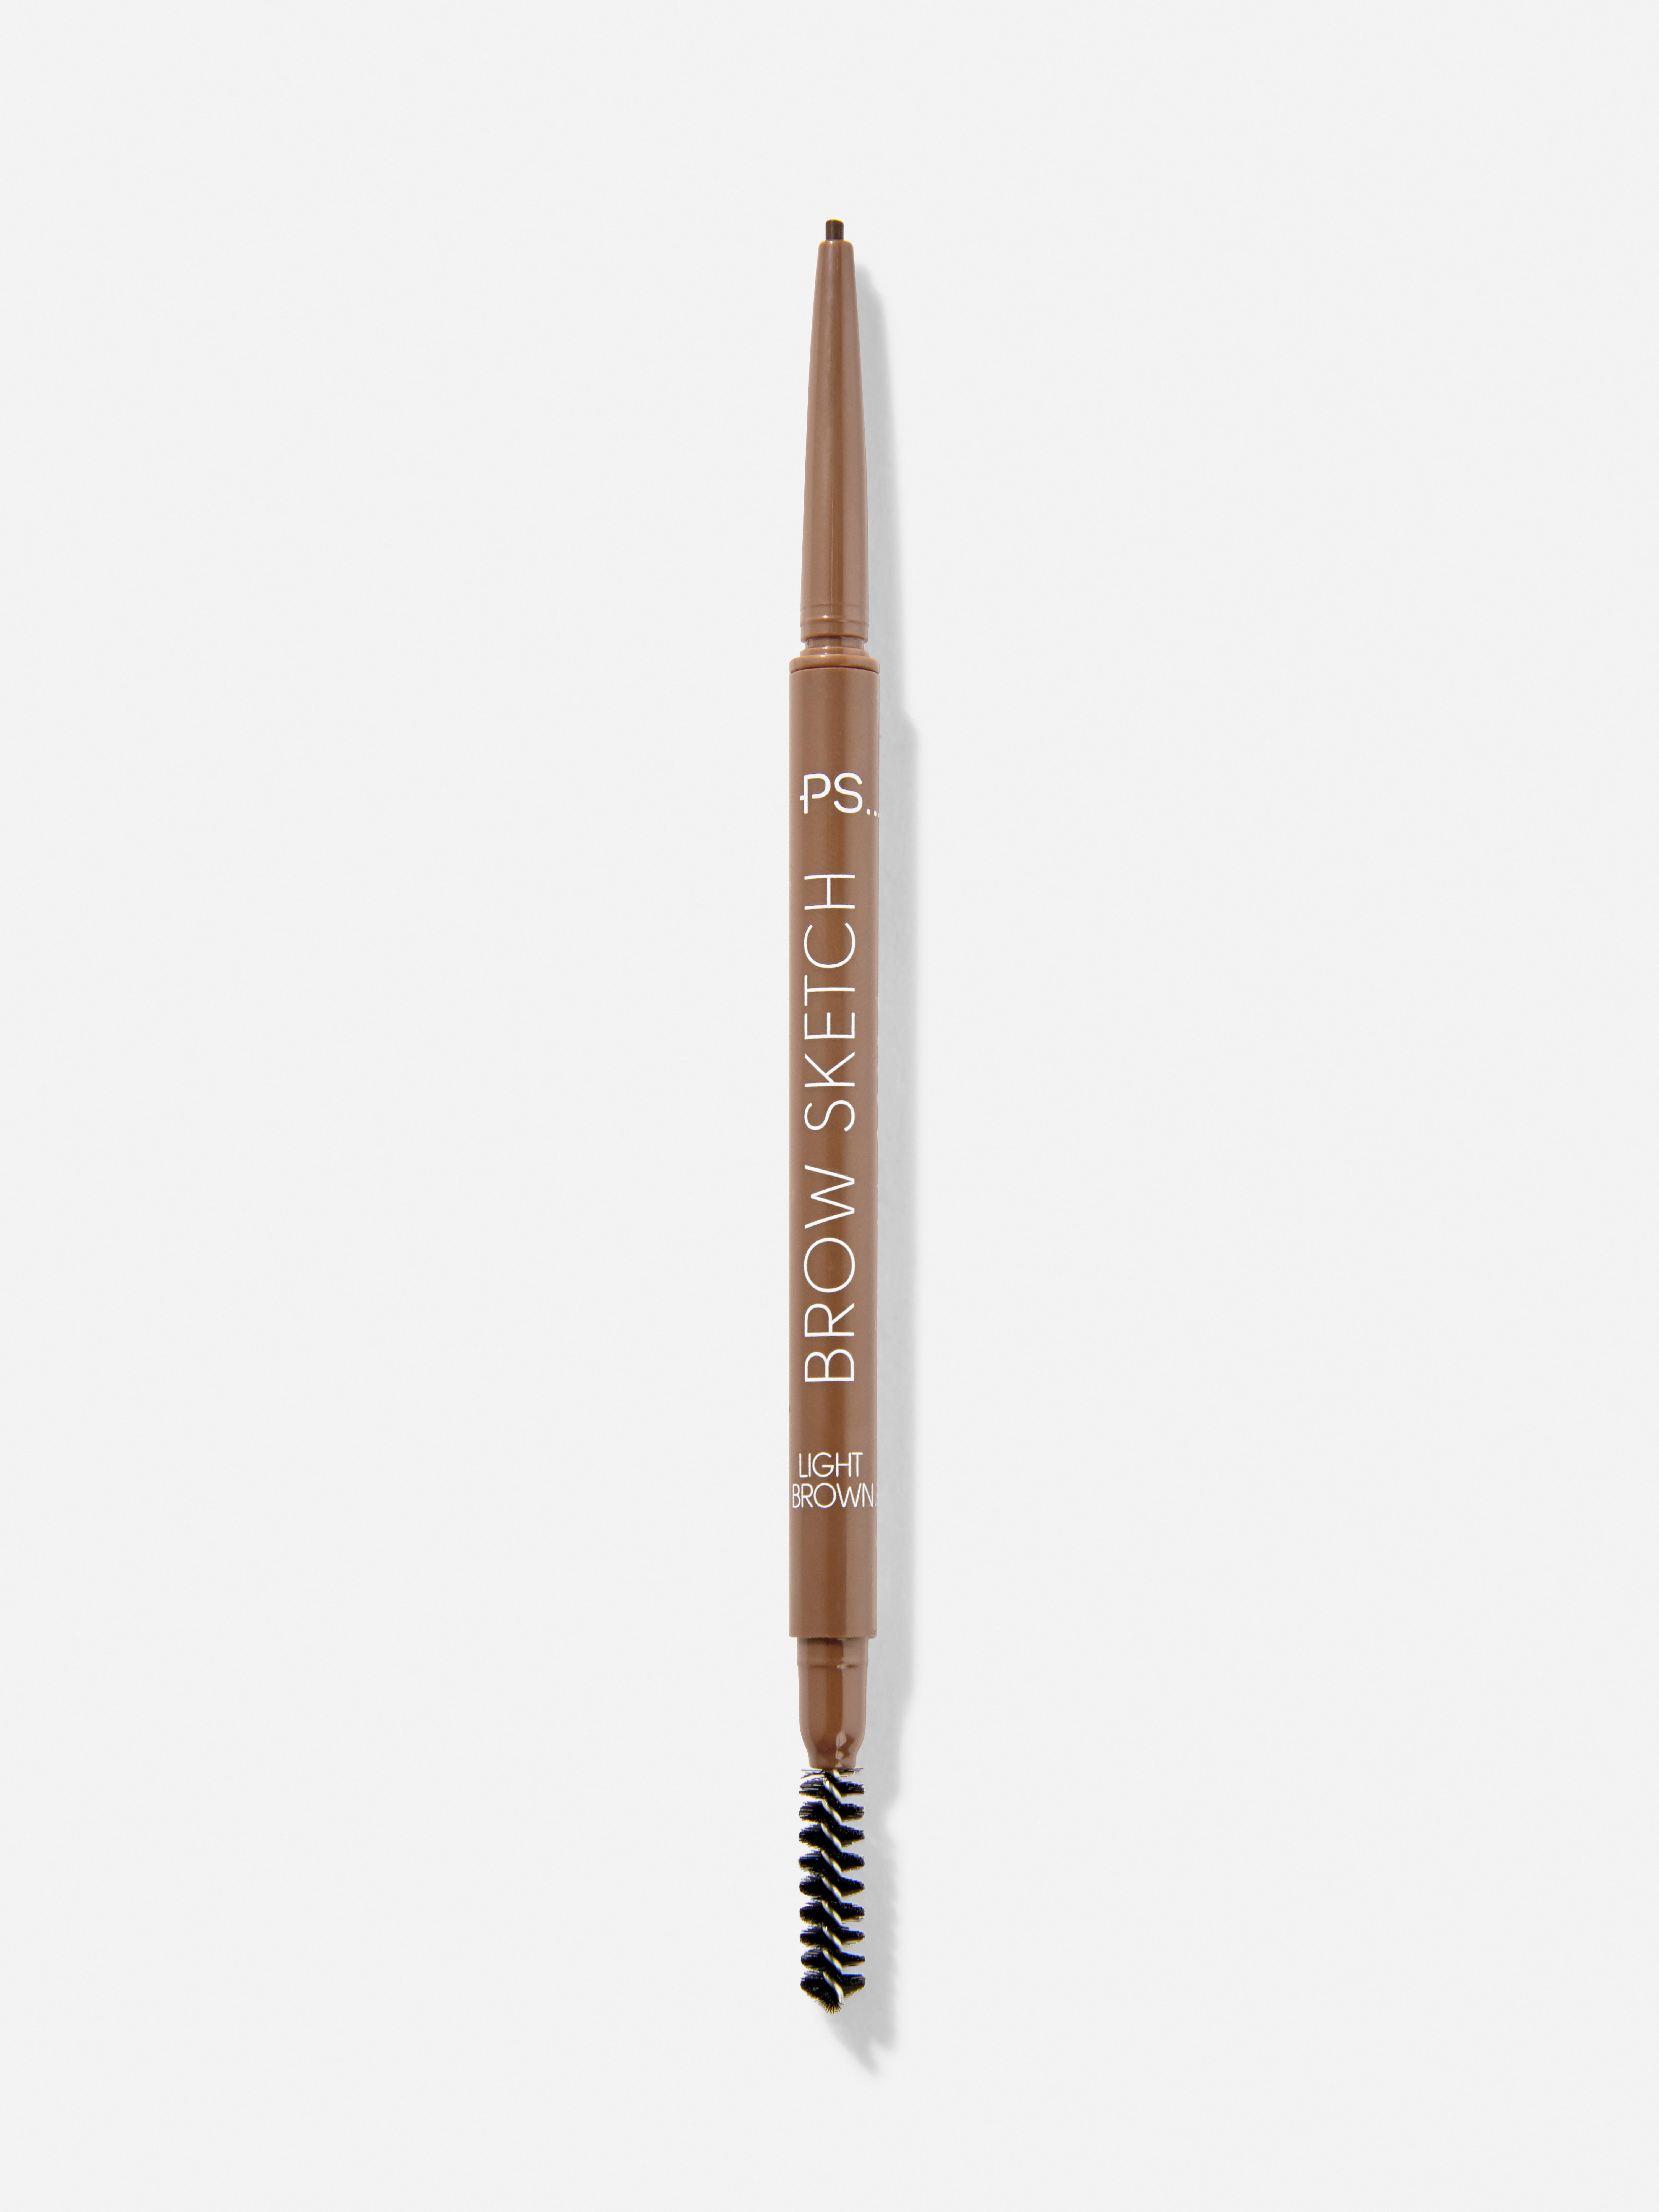 PS Line Brow Defining Duo